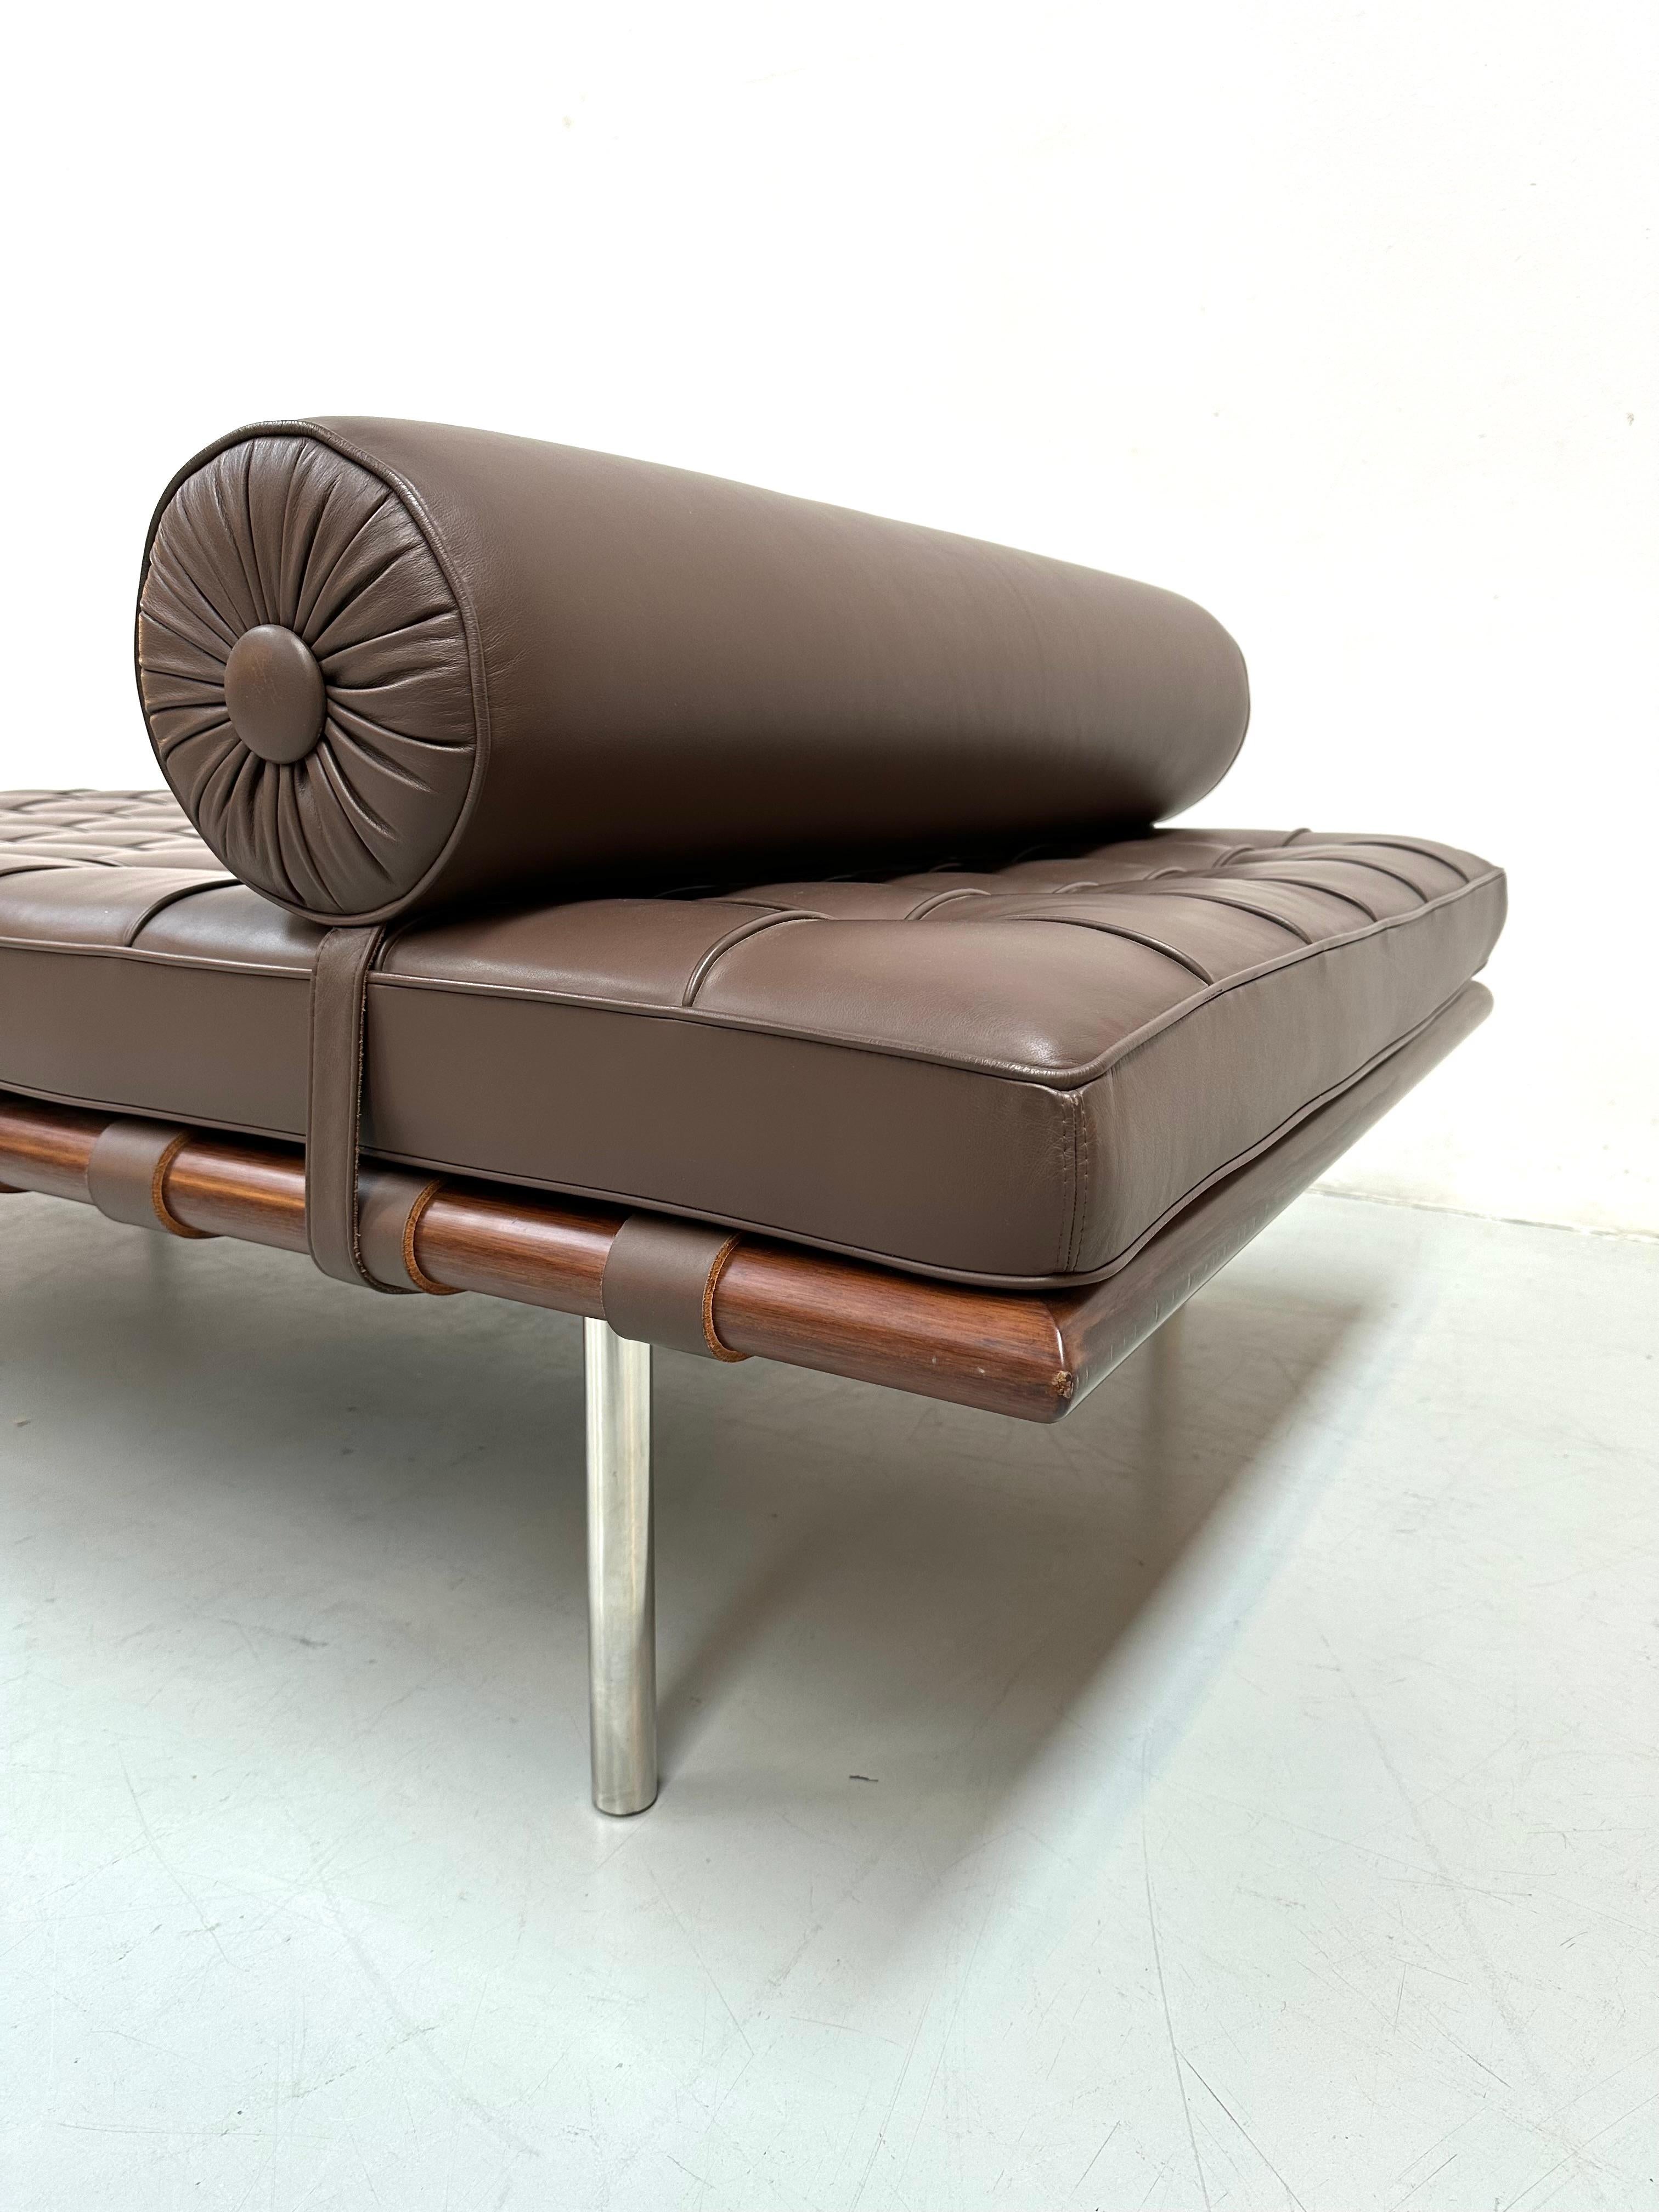 Mid-Century Modern Barcelona Daybed in Brown Leather by Ludwig Mies van der Rohe for Knoll, 1980s. For Sale